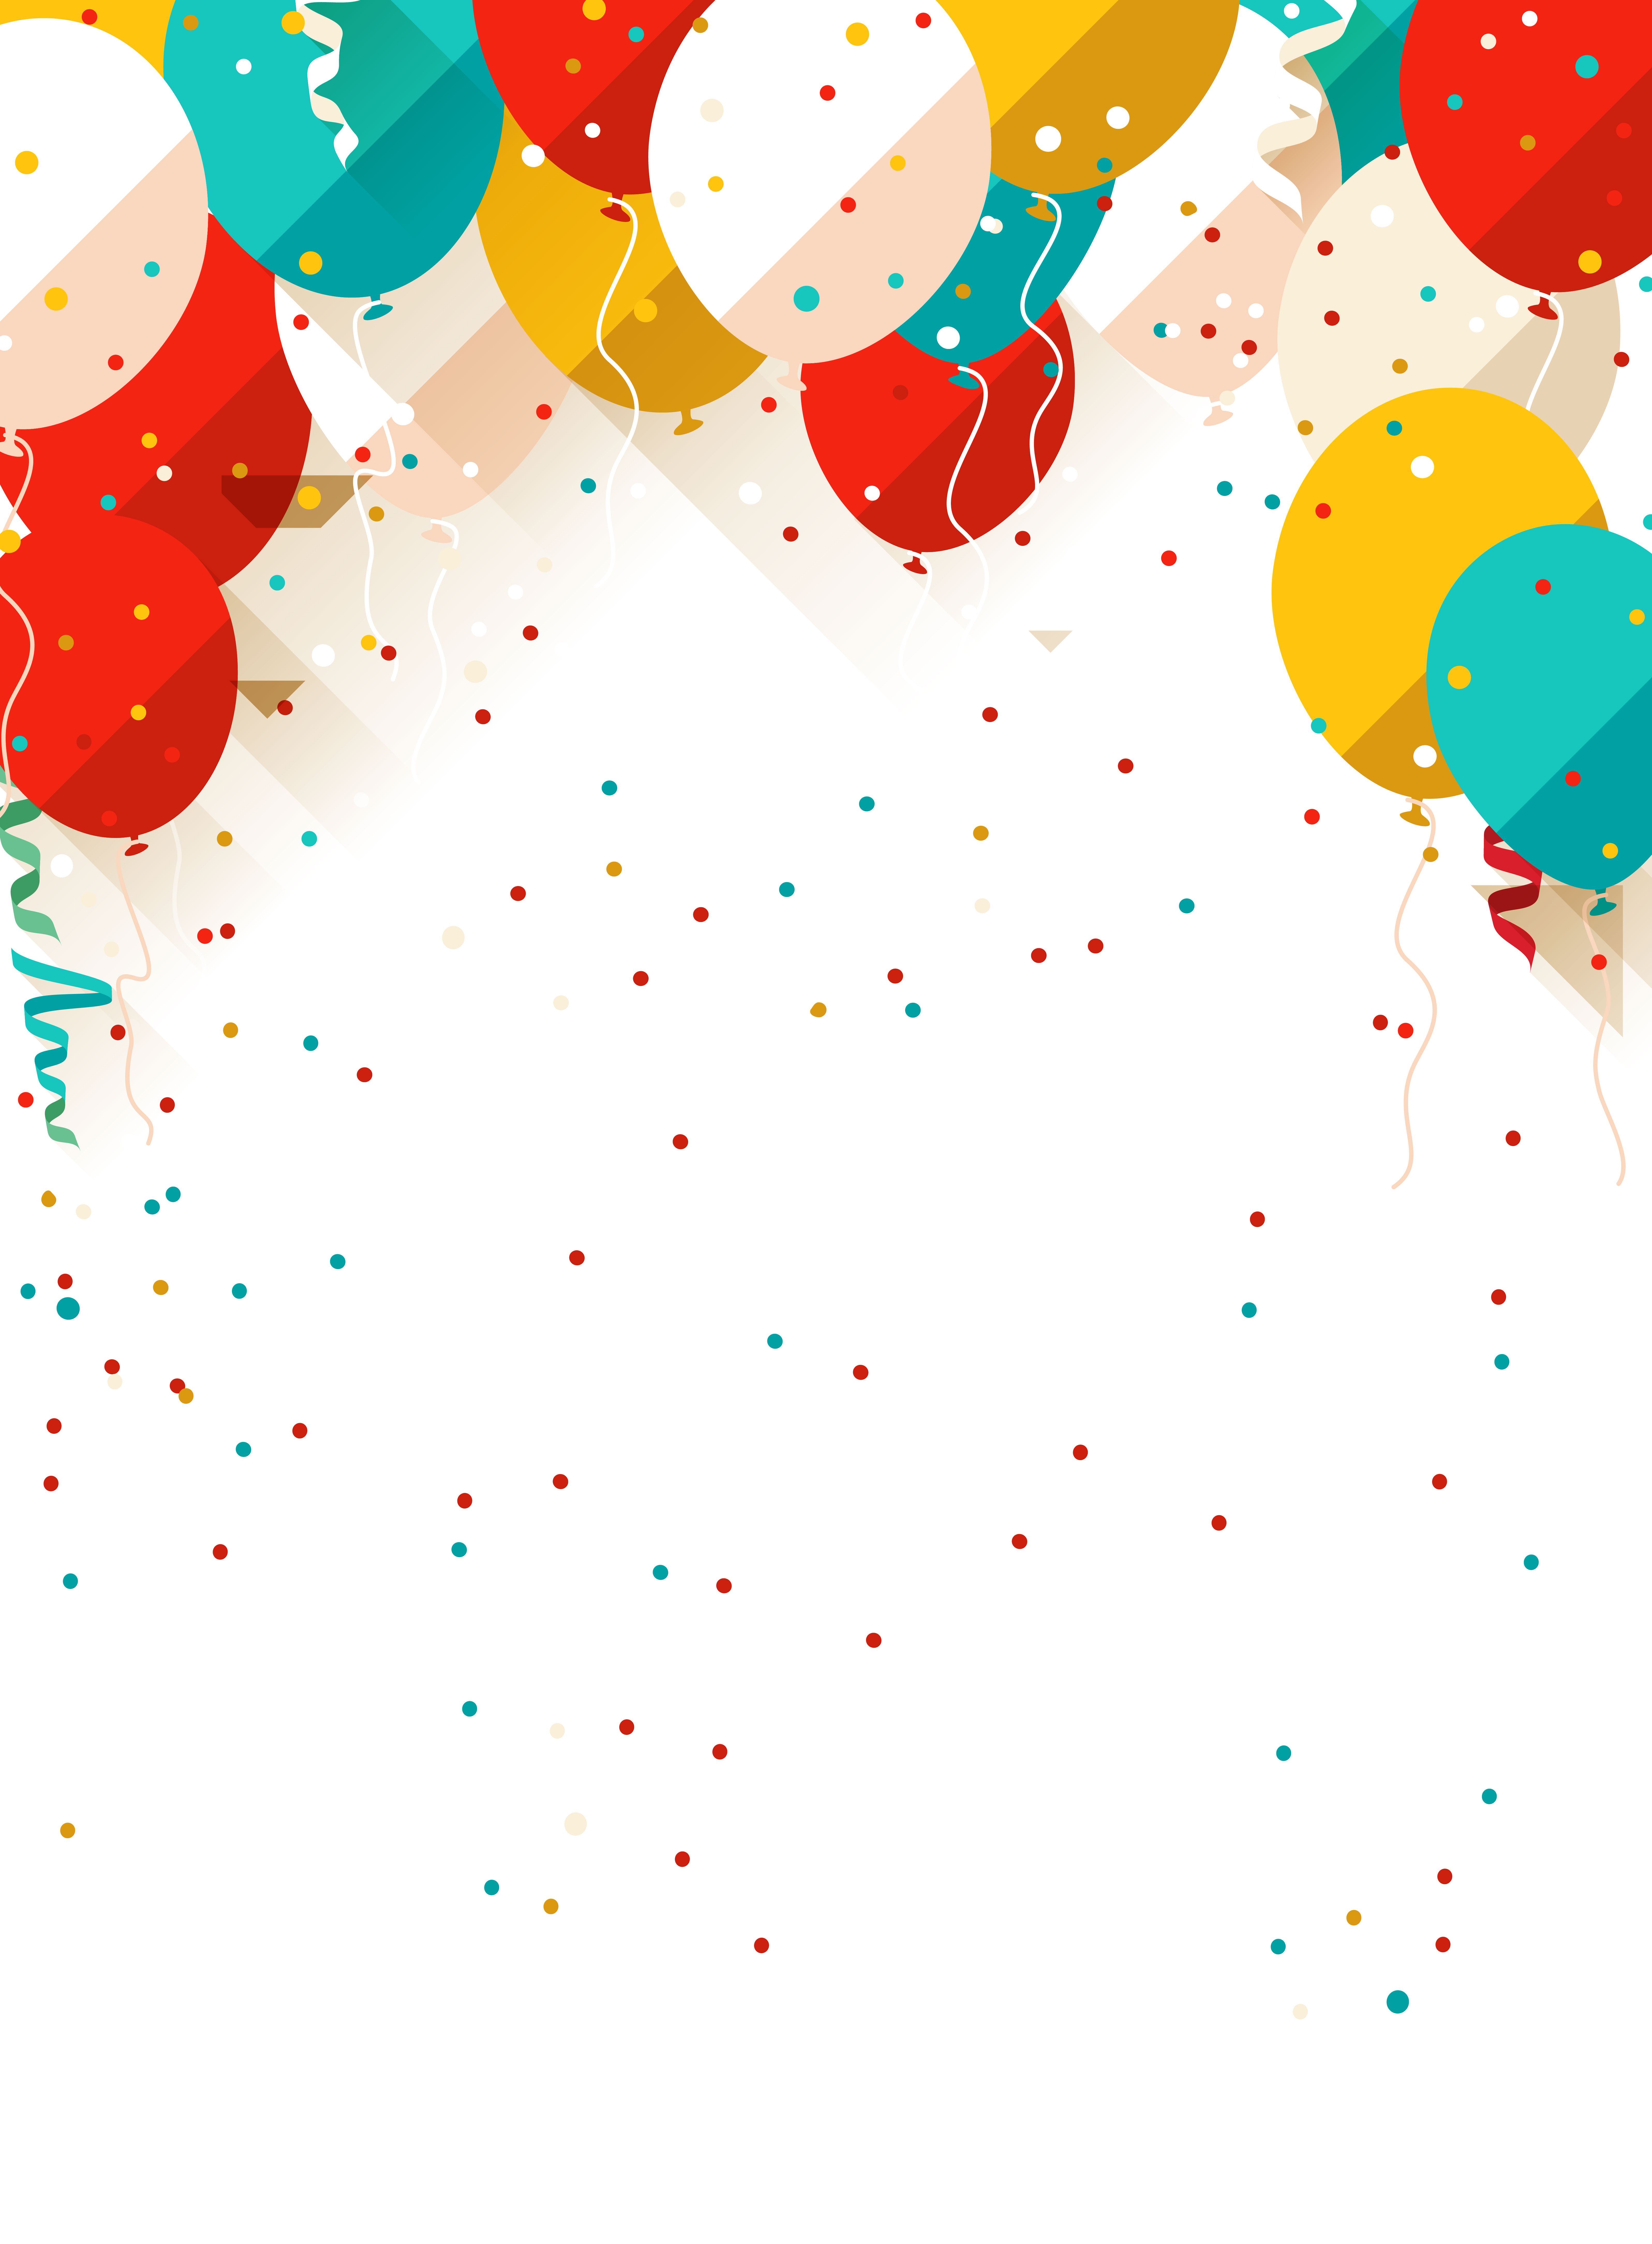 Colorful Birthday Wallpaper, HD Colorful Birthday Background on WallpaperBat